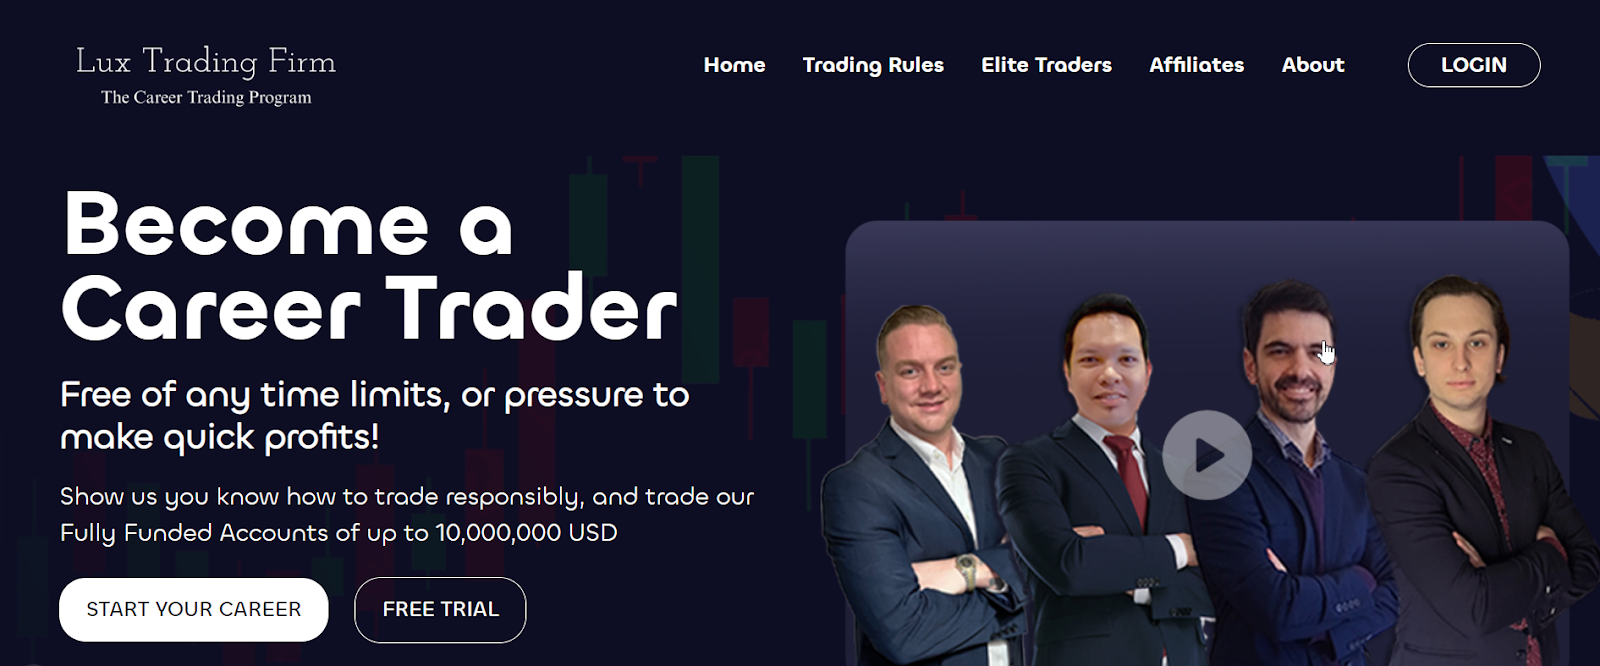 Review of Lux Trading Firm - Free trial